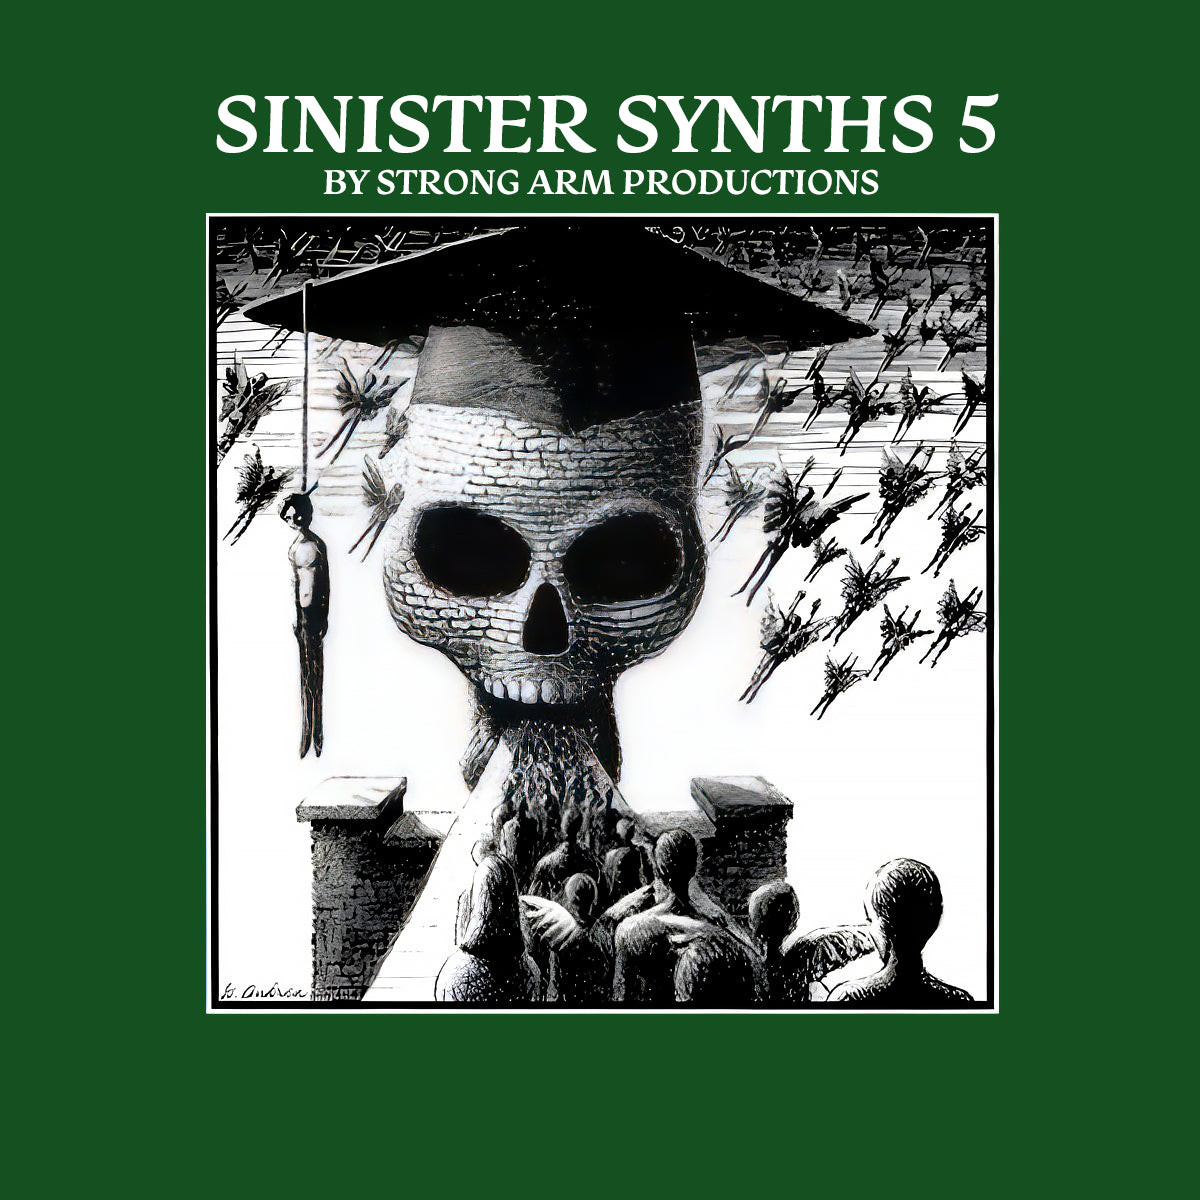 Sinister Synths 5